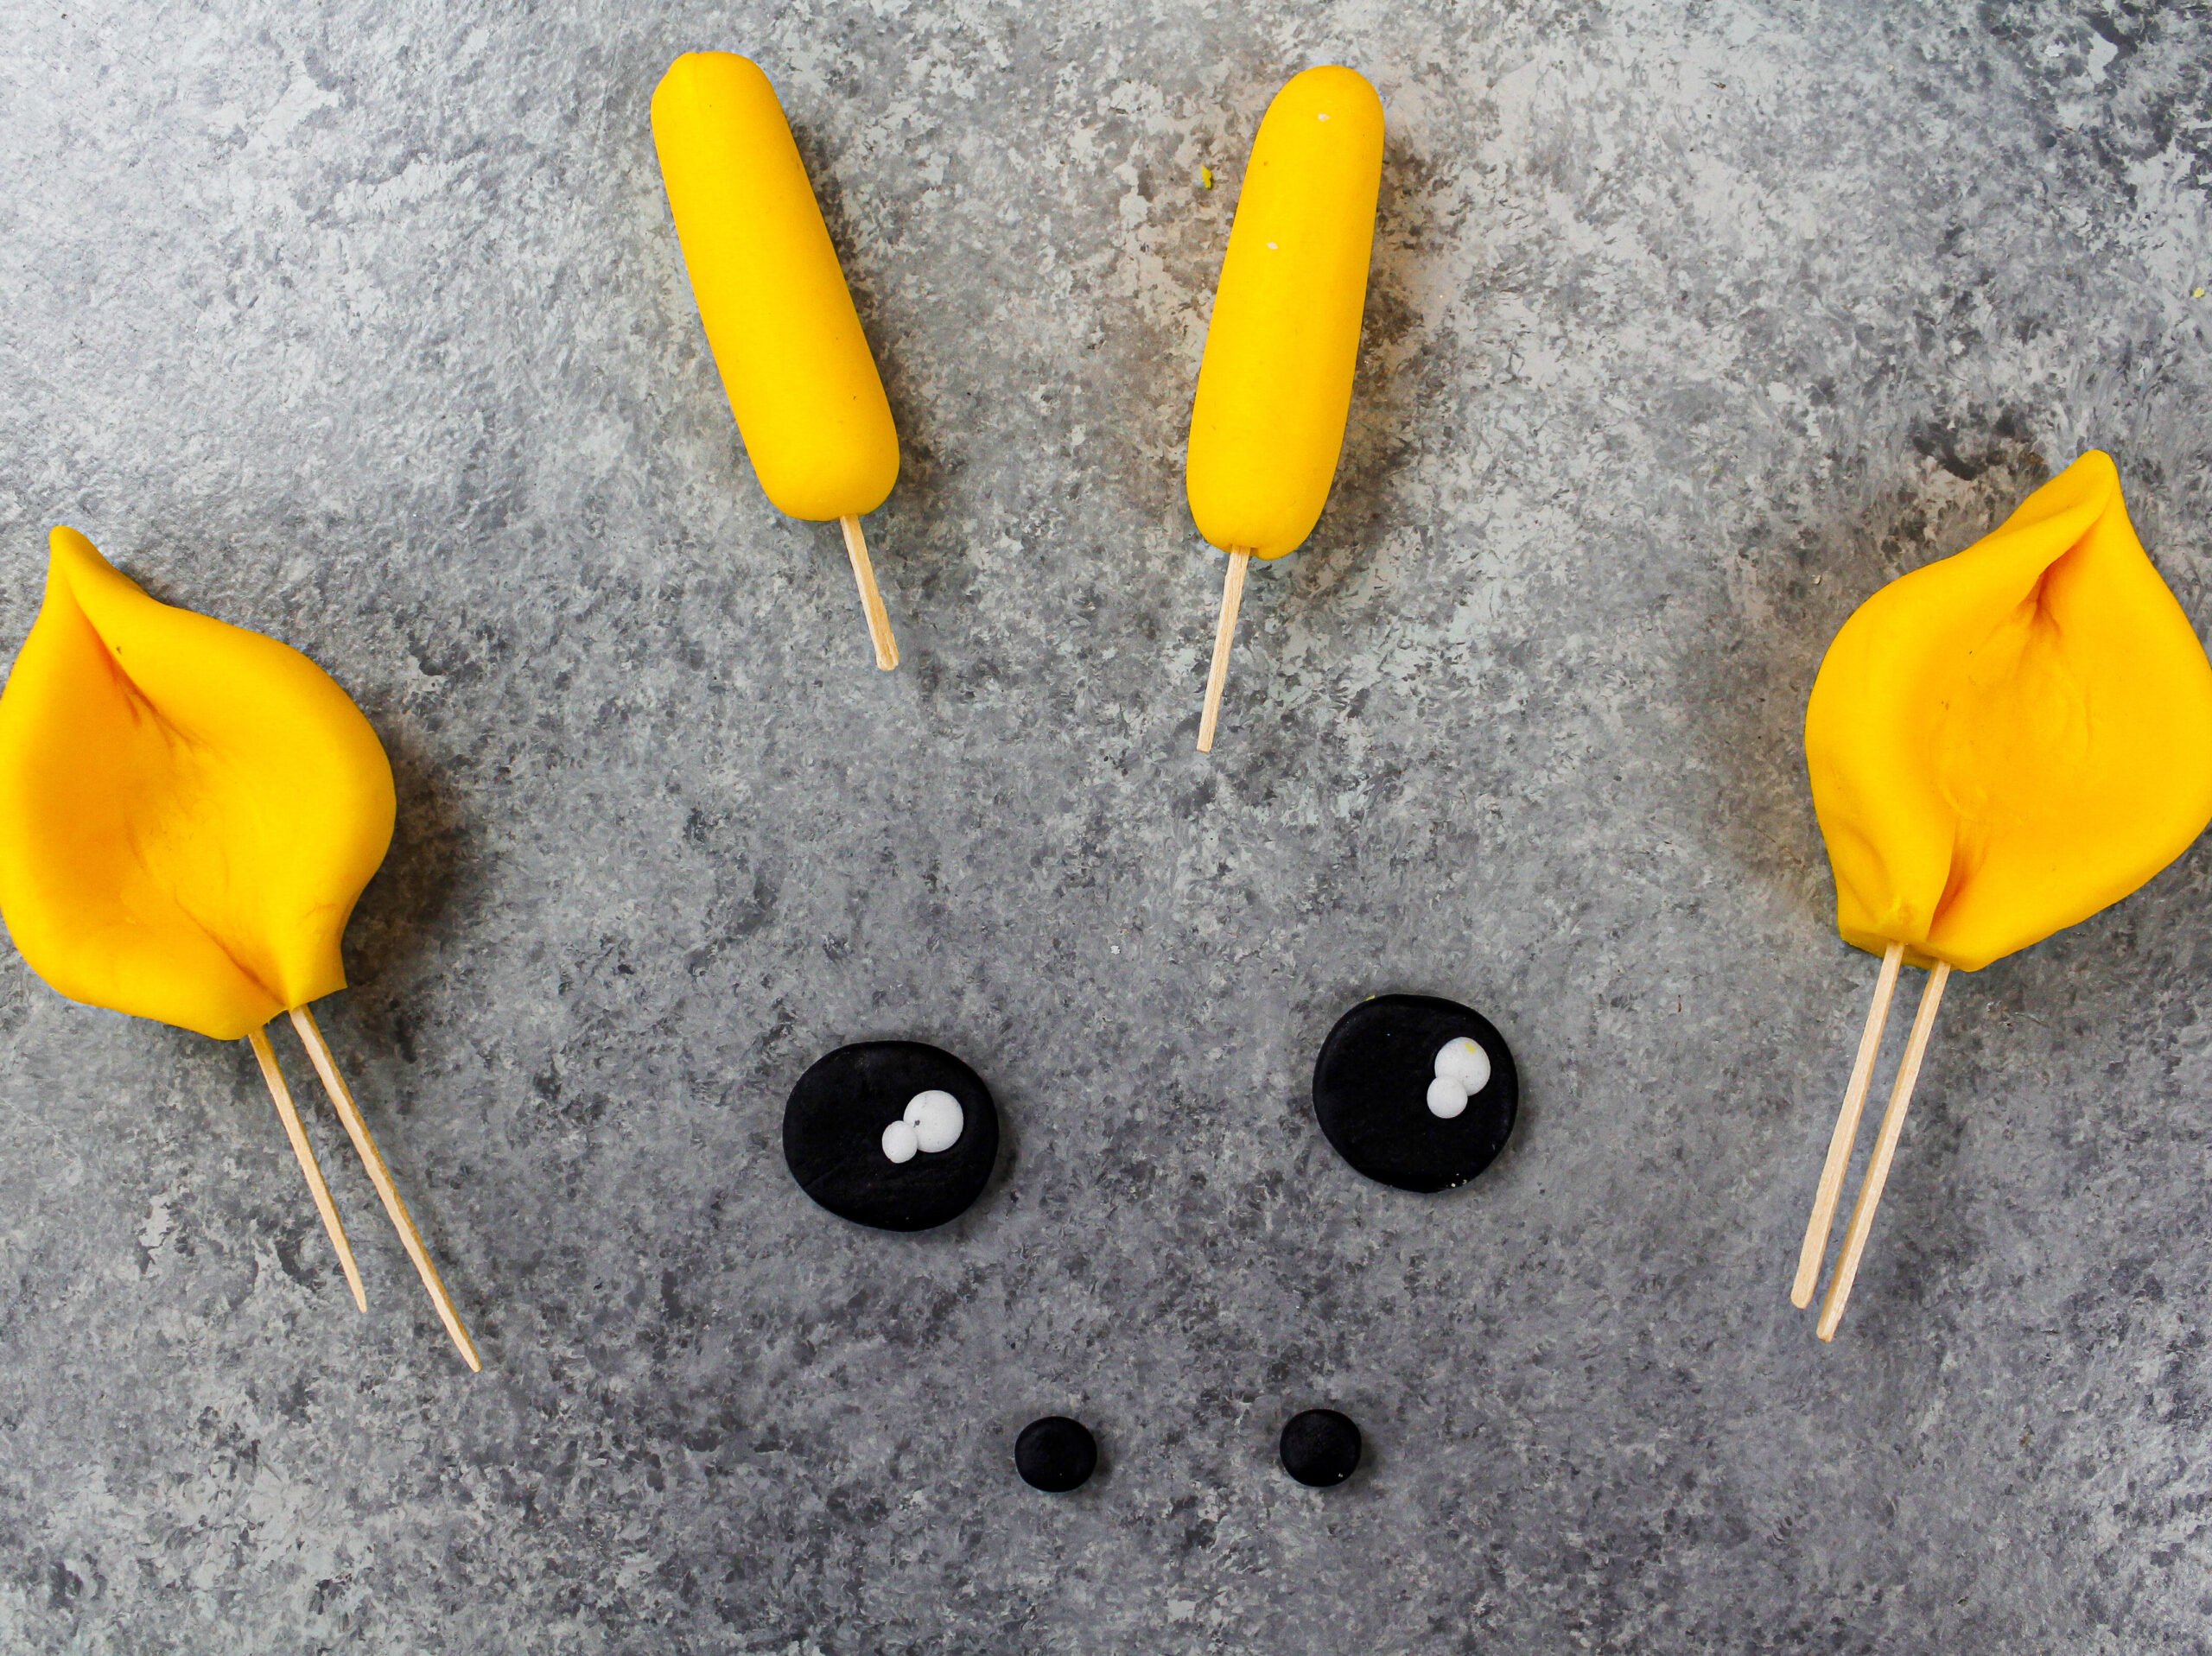 image of yellow and black fondant used to make the eyes and ears for a giraffe cake